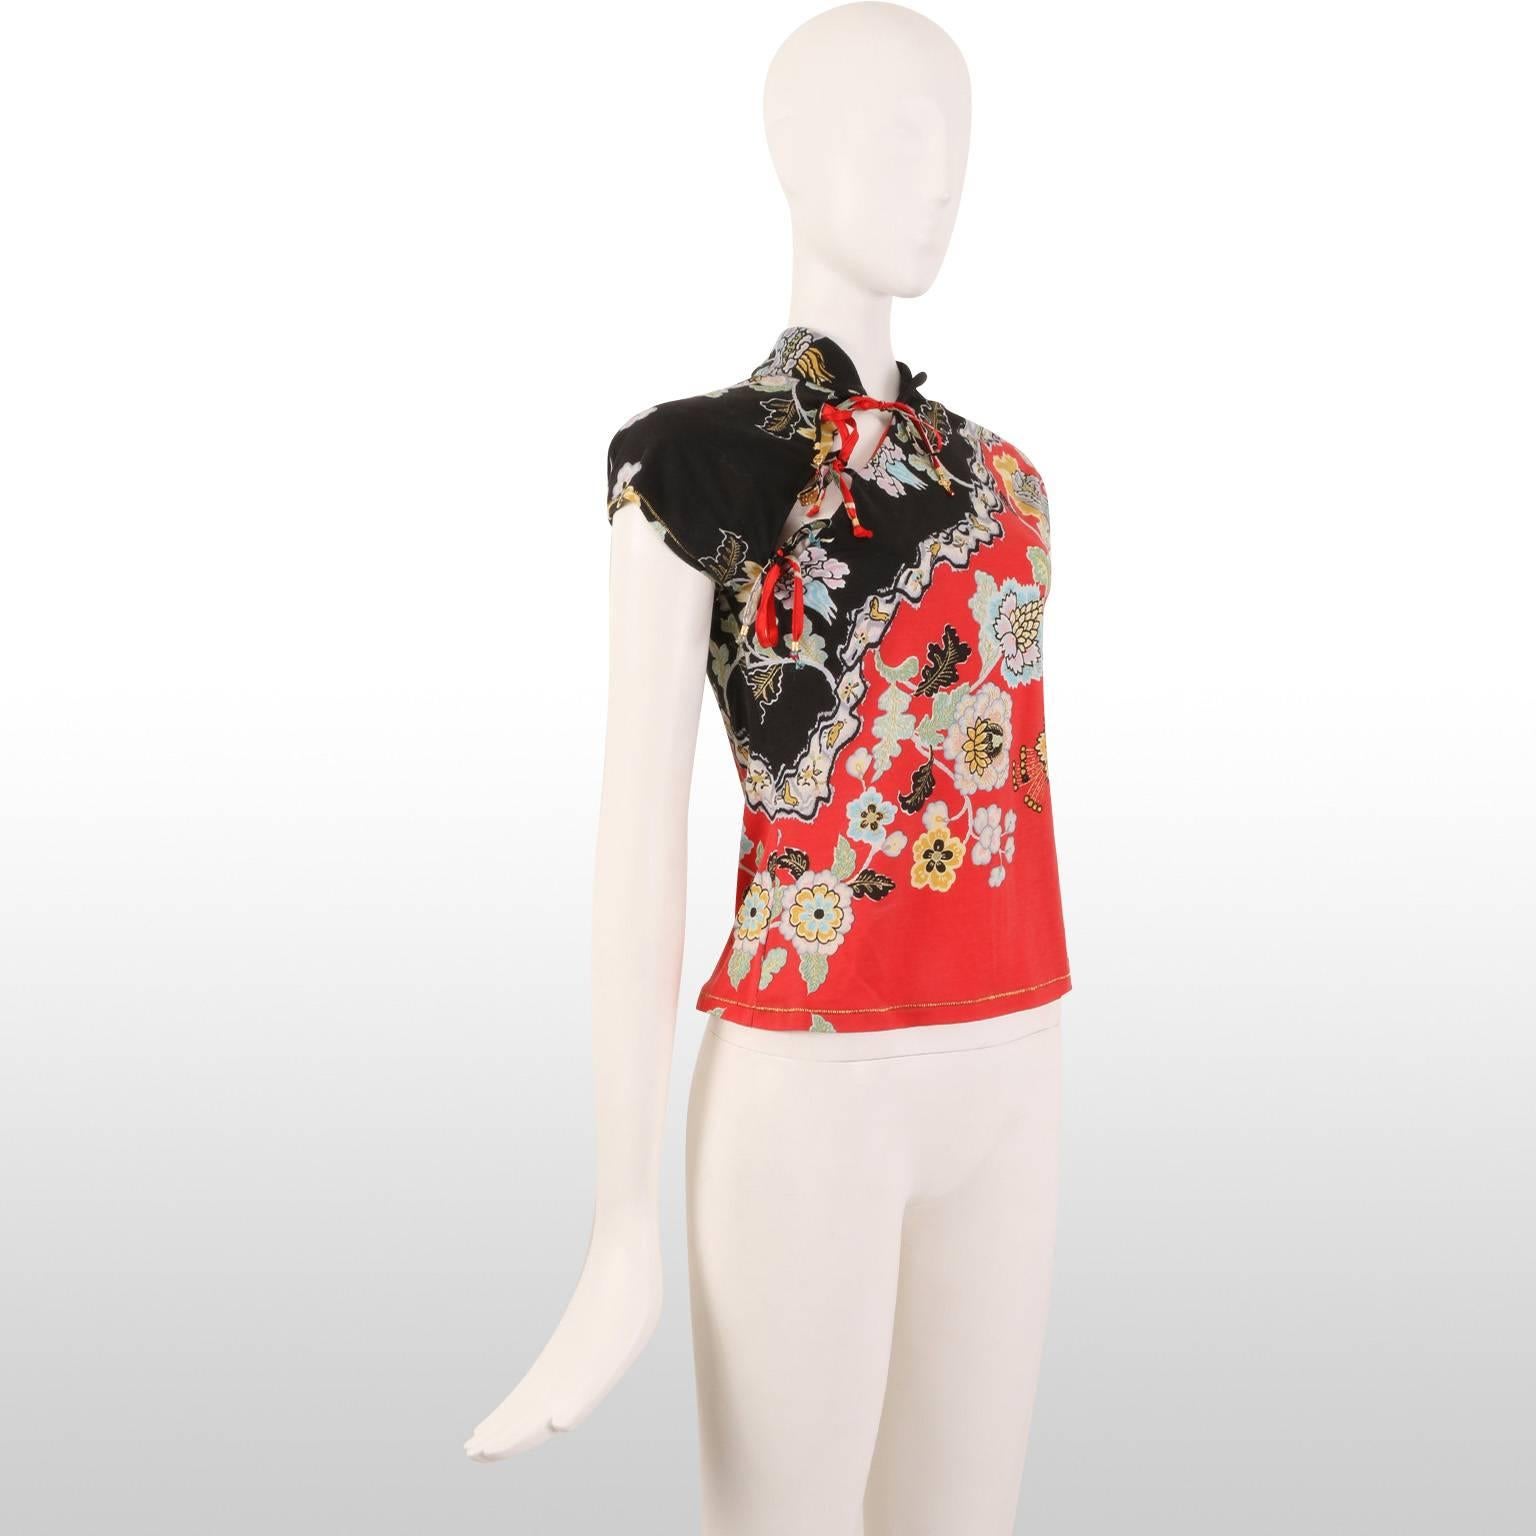 This is a Roberto Cavalli oriental style top with tie fastening. The piece is black and red, with gold glitter detailing. The body is made out of modal and the ornaments out of Silk. The Top remains in excellent condition. 